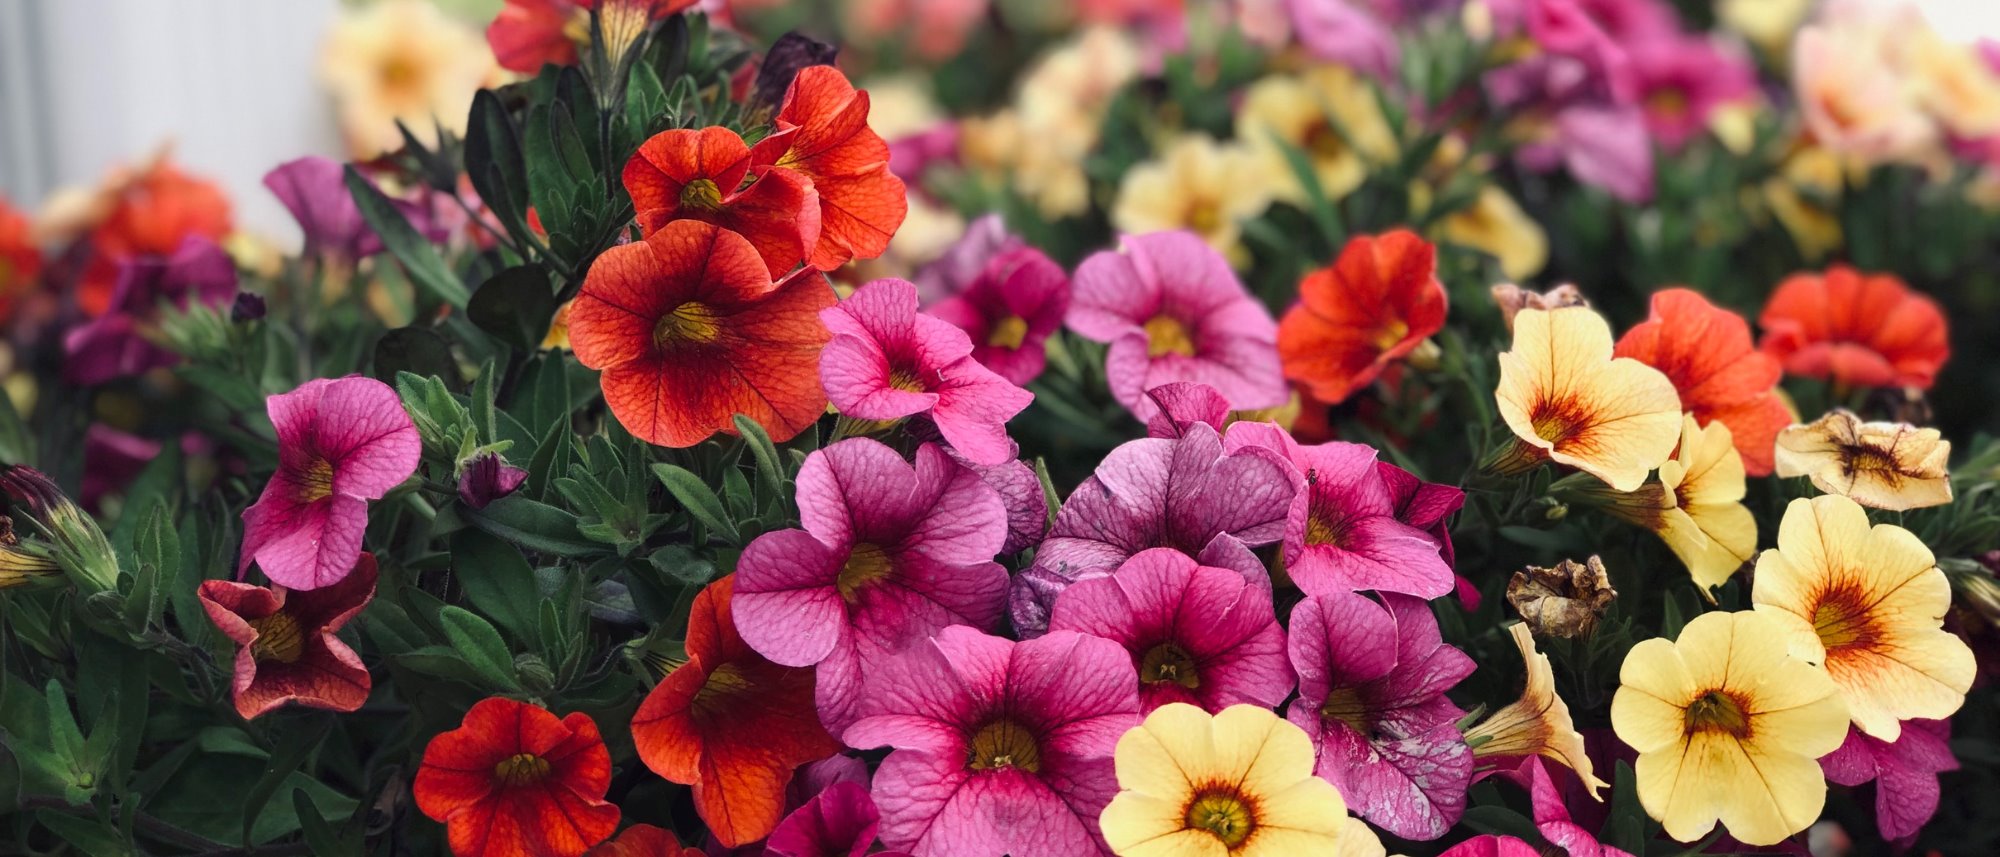 Grow a colorful mix of container and bedding petunias